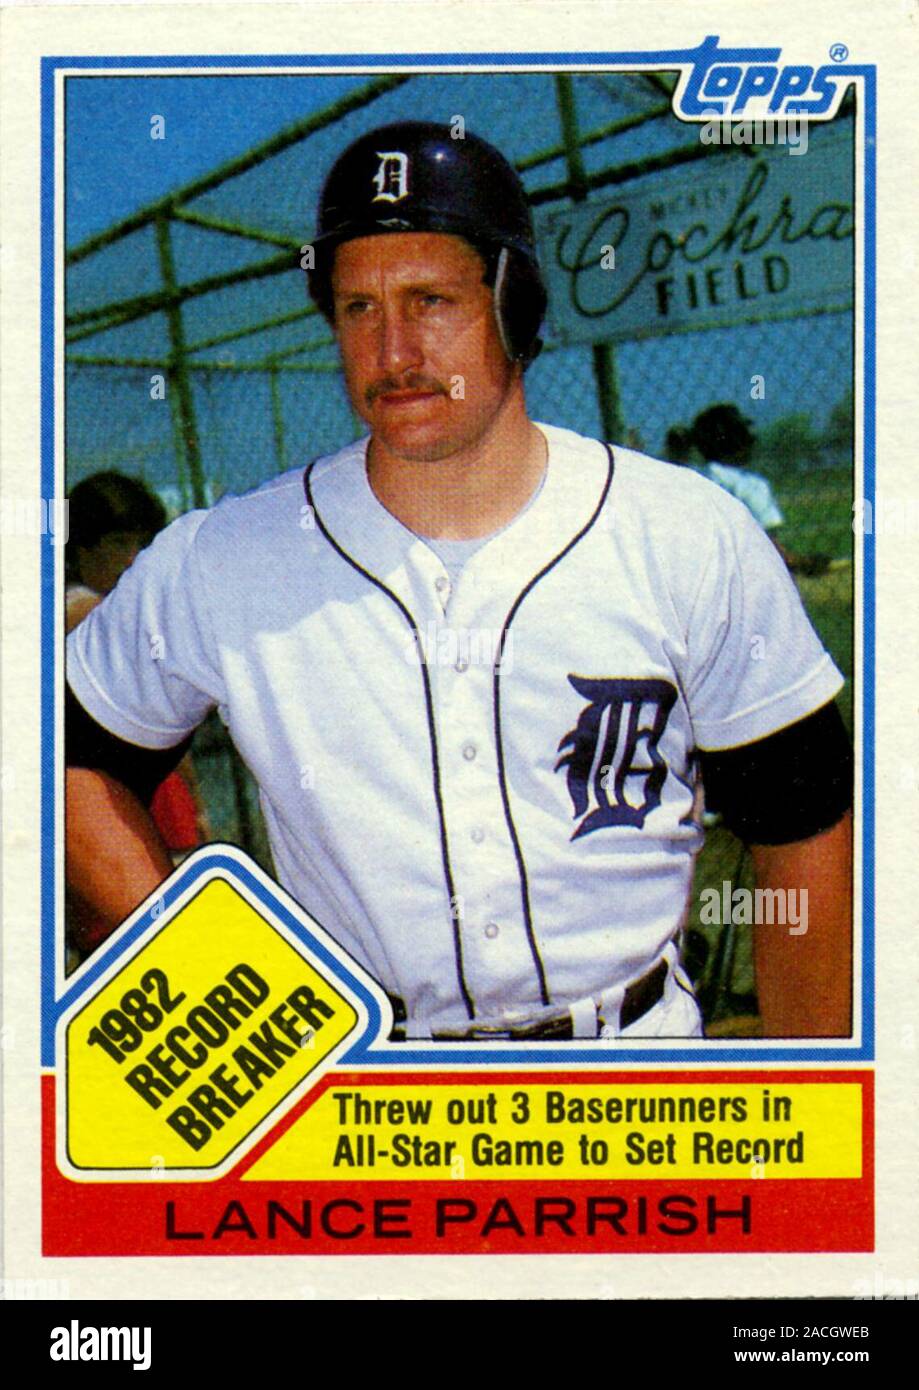 Topps 1983 baseball card depicting Lance Parrish with the Detroit Tigers  Stock Photo - Alamy